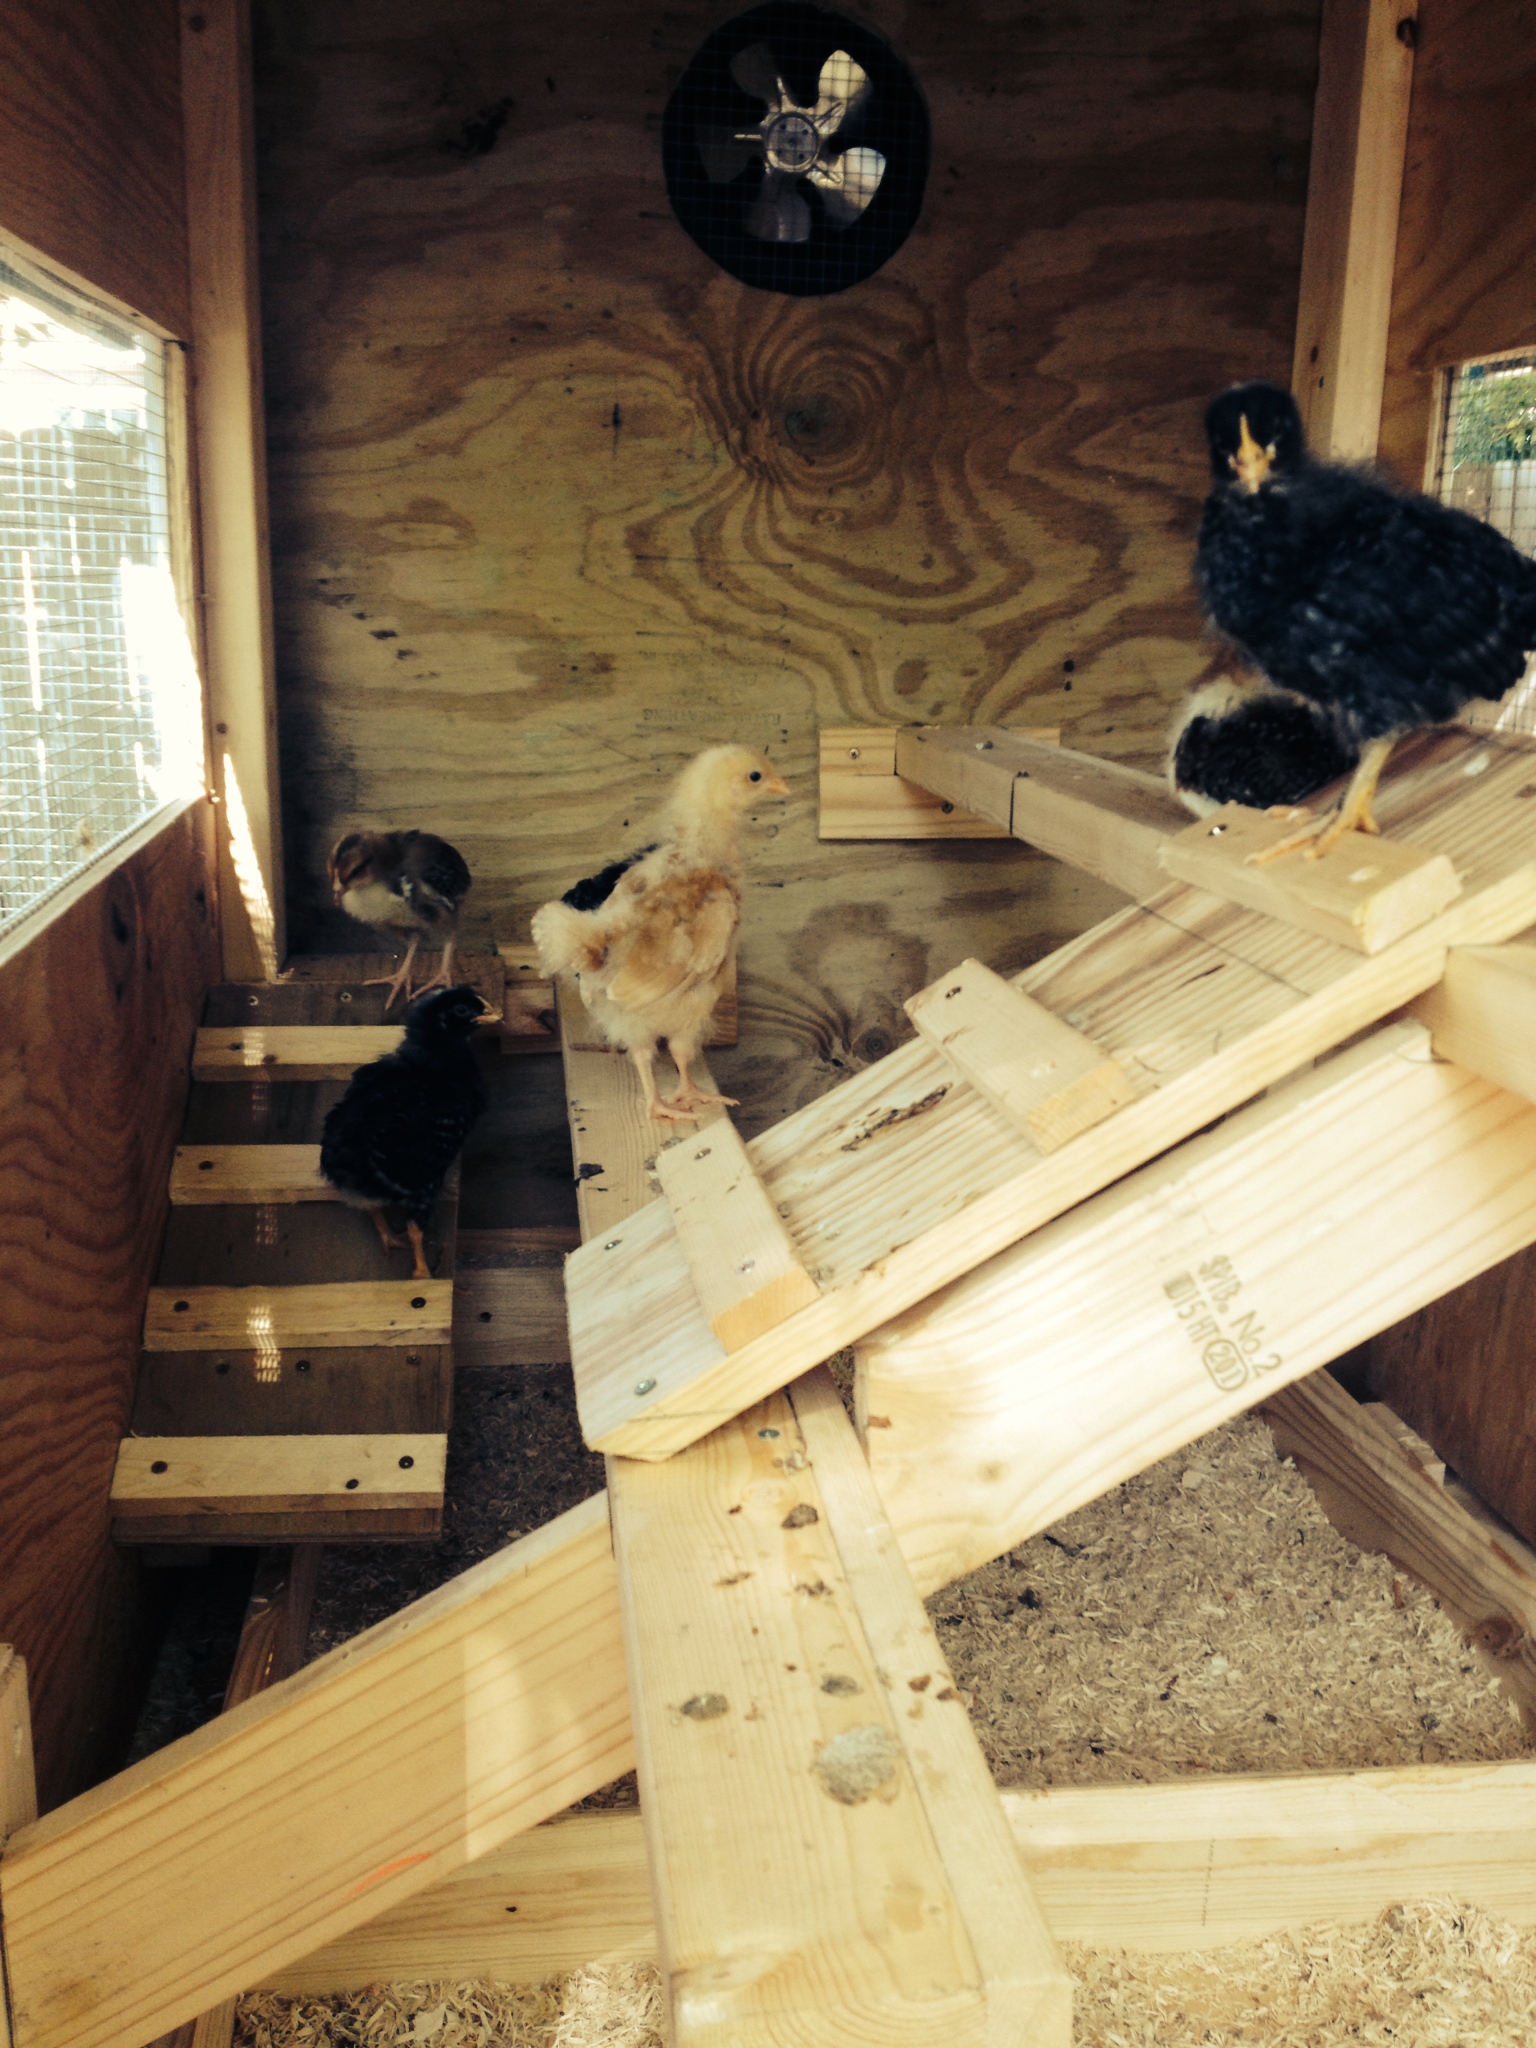 All the girls in the coop